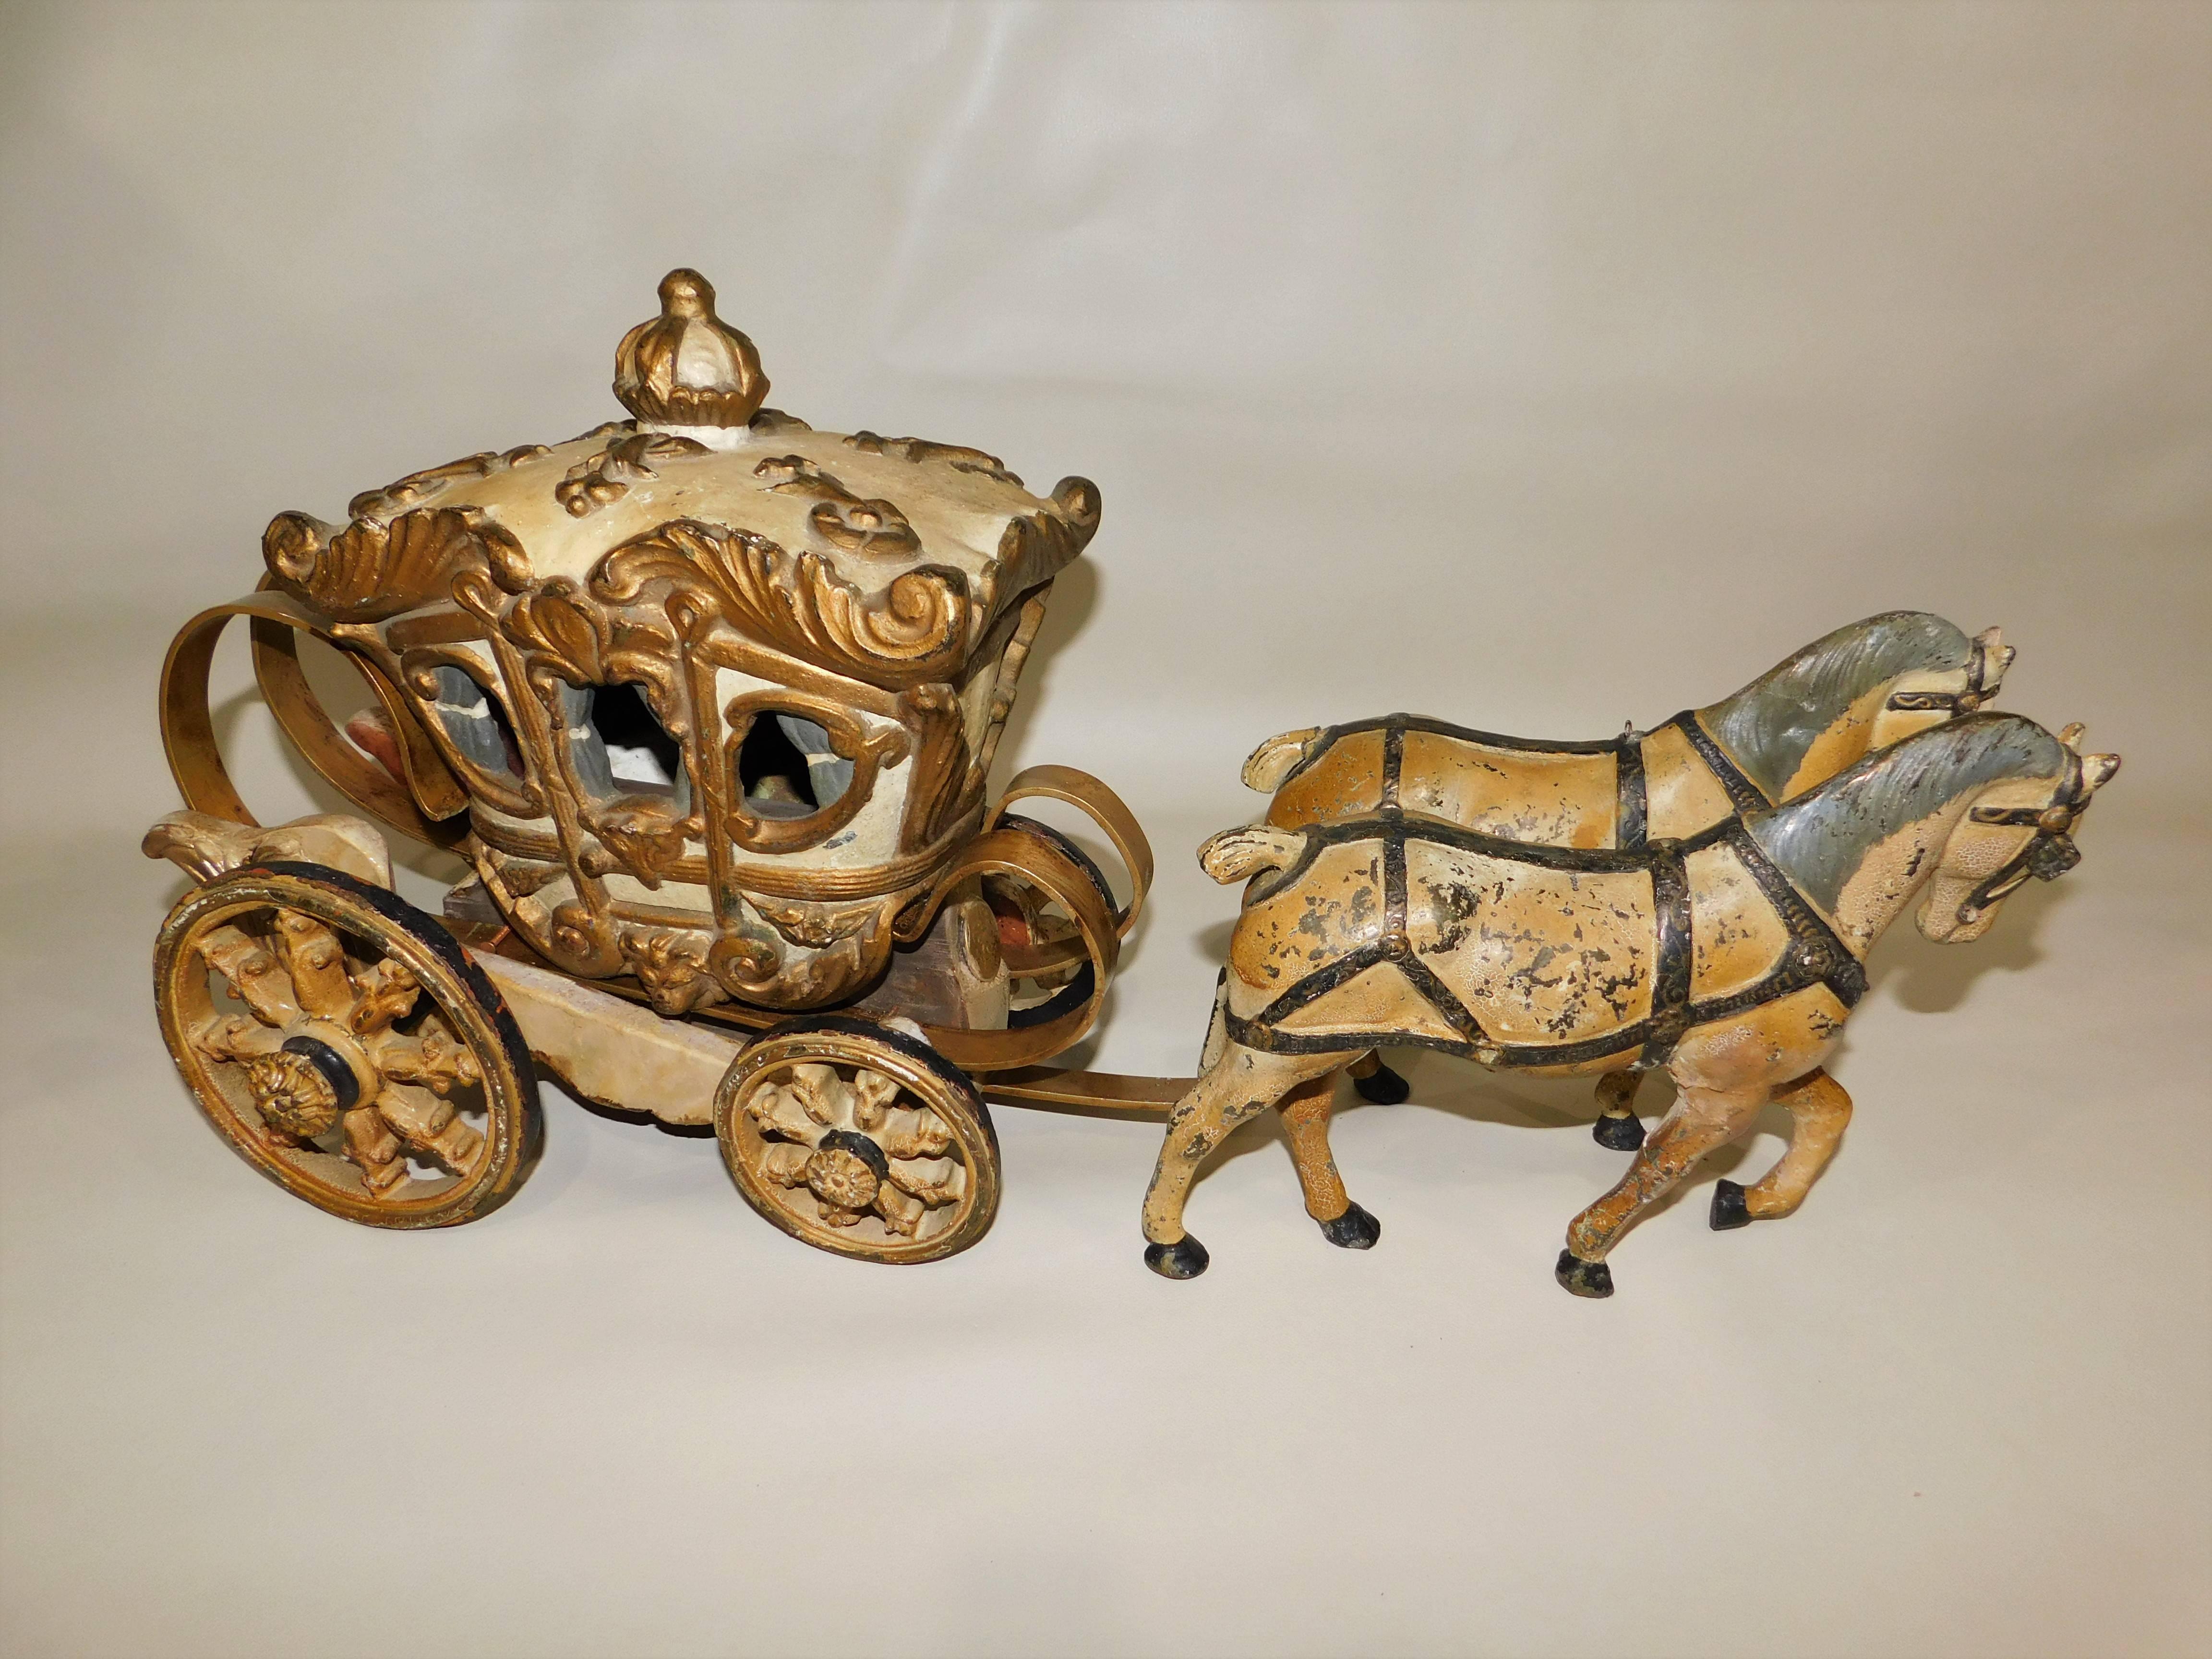 Hand-painted metal and wood horses pulling an ornate carriage. Was used as an advertising window prop or just as a toy.